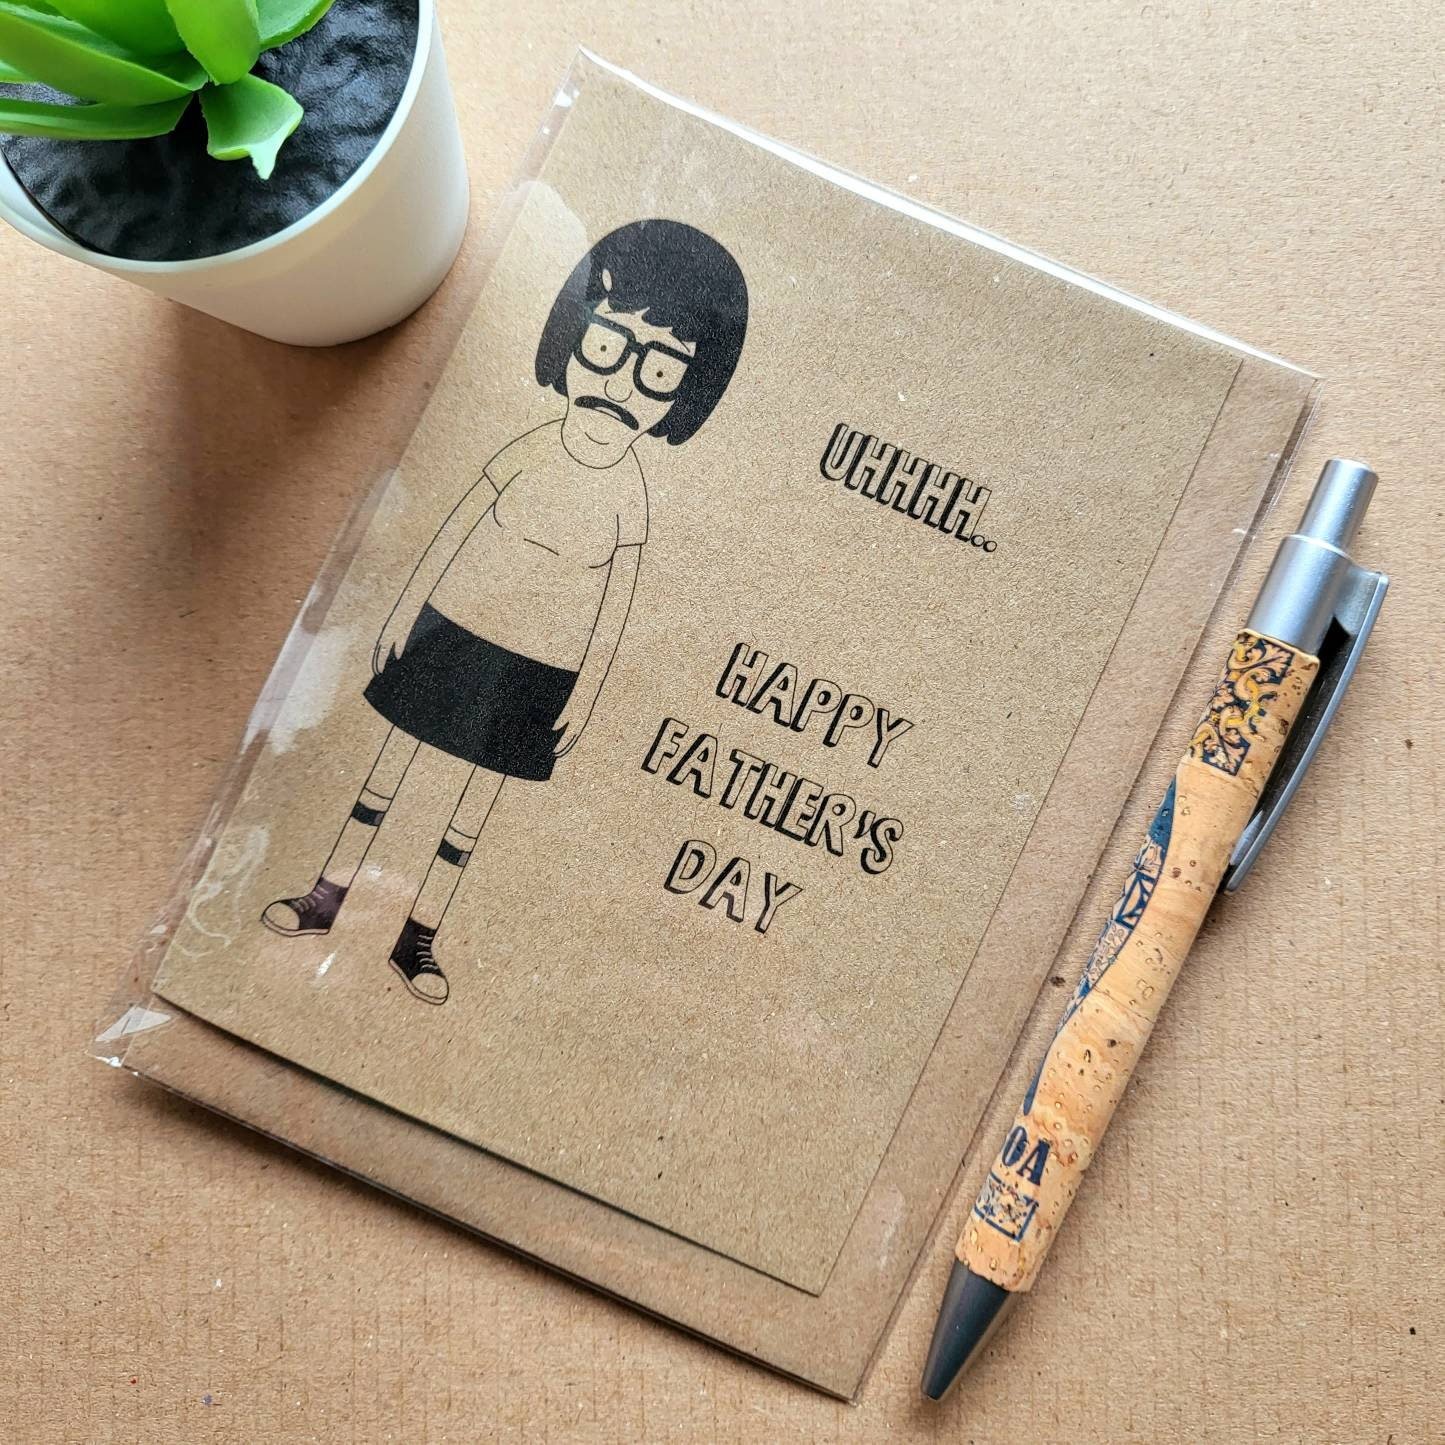 Funny Bobs Burgers Fathers Day Card - Tina Belcher uhhh